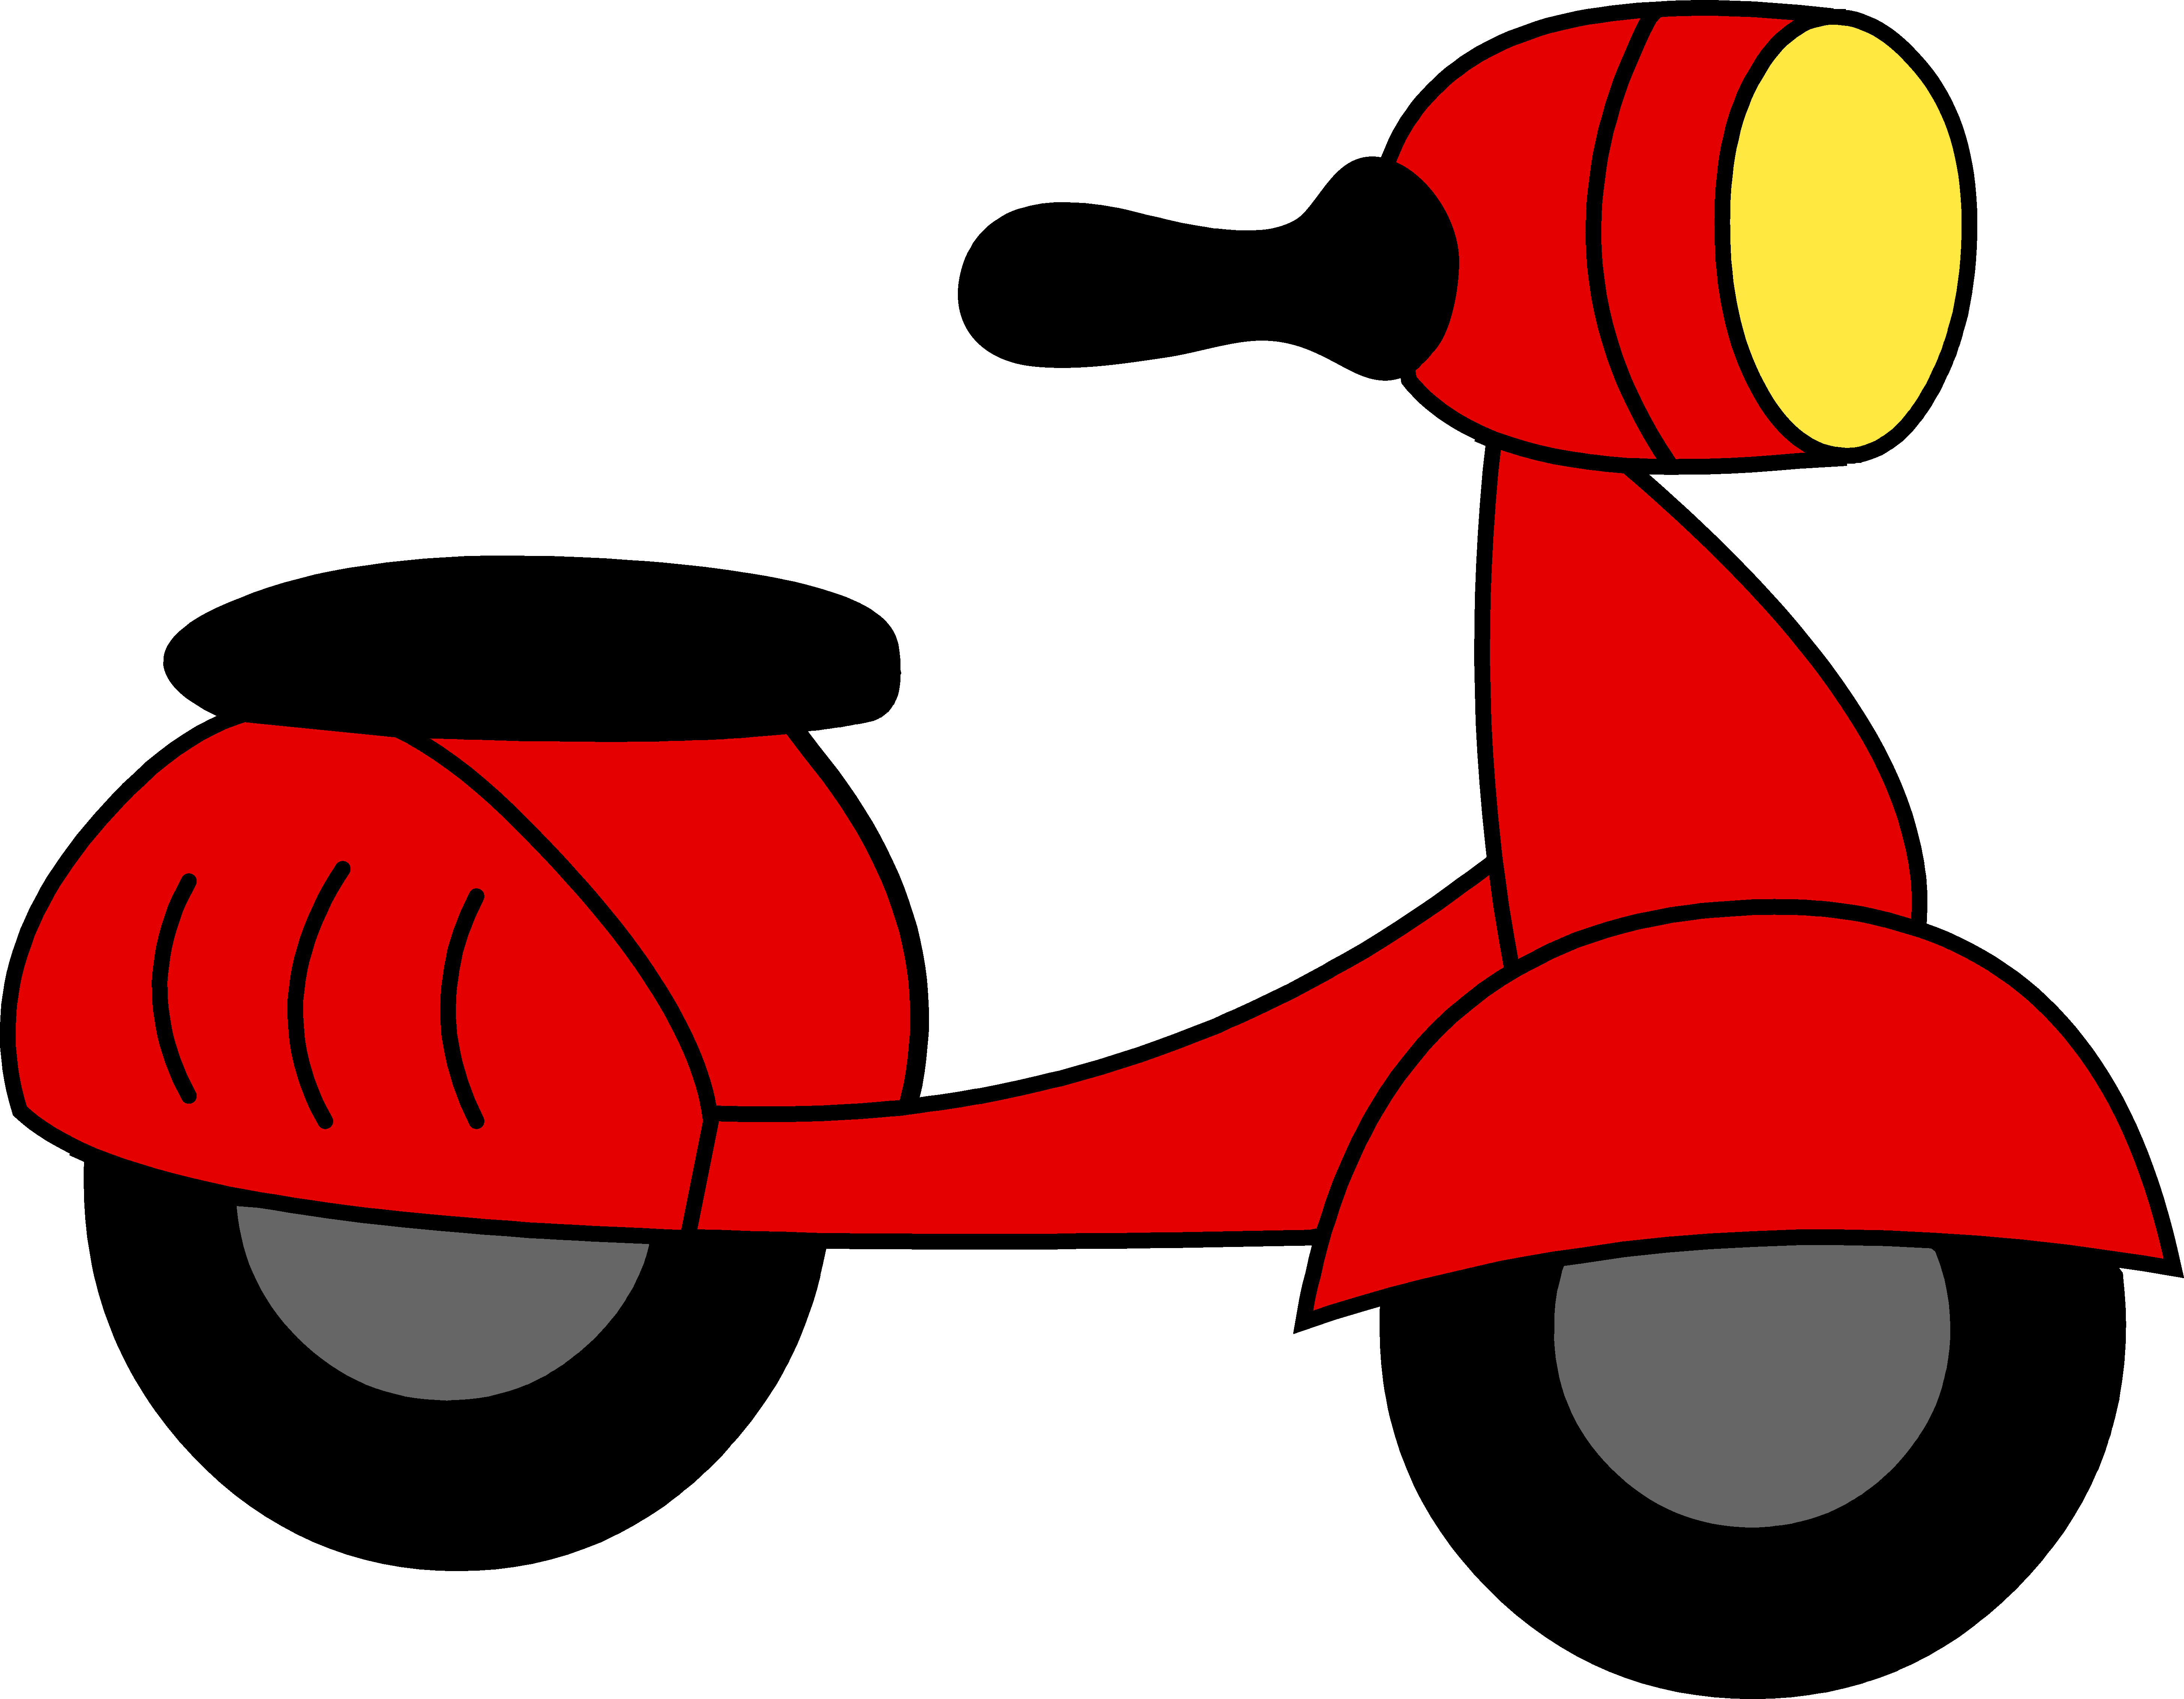 Little red motor scooter. Engine clipart motorcycle piston